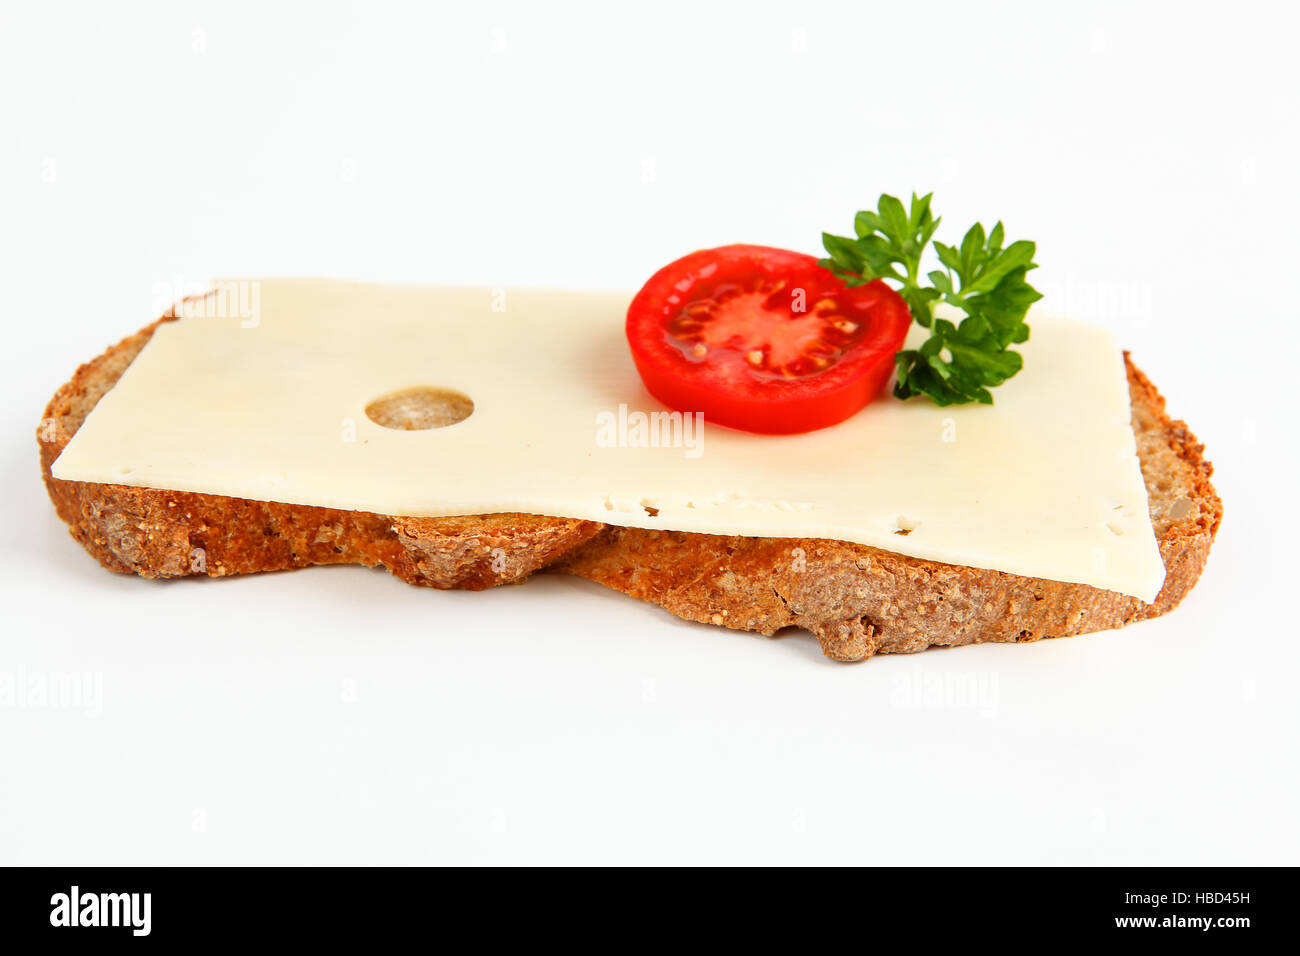 bread with cheese Stock Photo